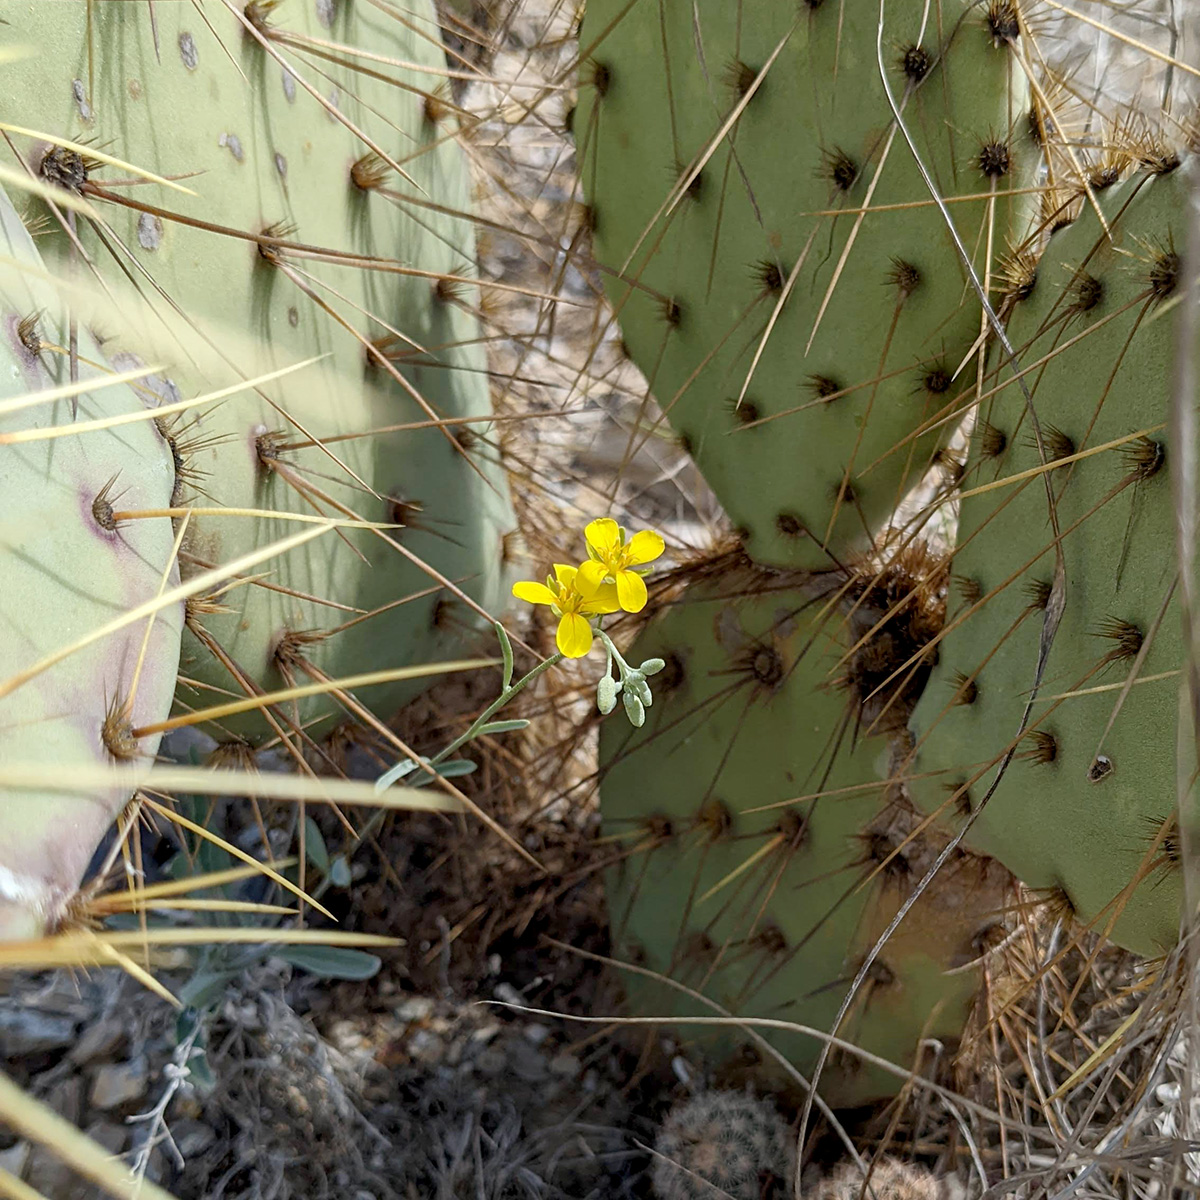 A flowering Zapata bladderpod nestles safely between the pads of a Texas prickly pear cactus, Opuntia linheimeri.